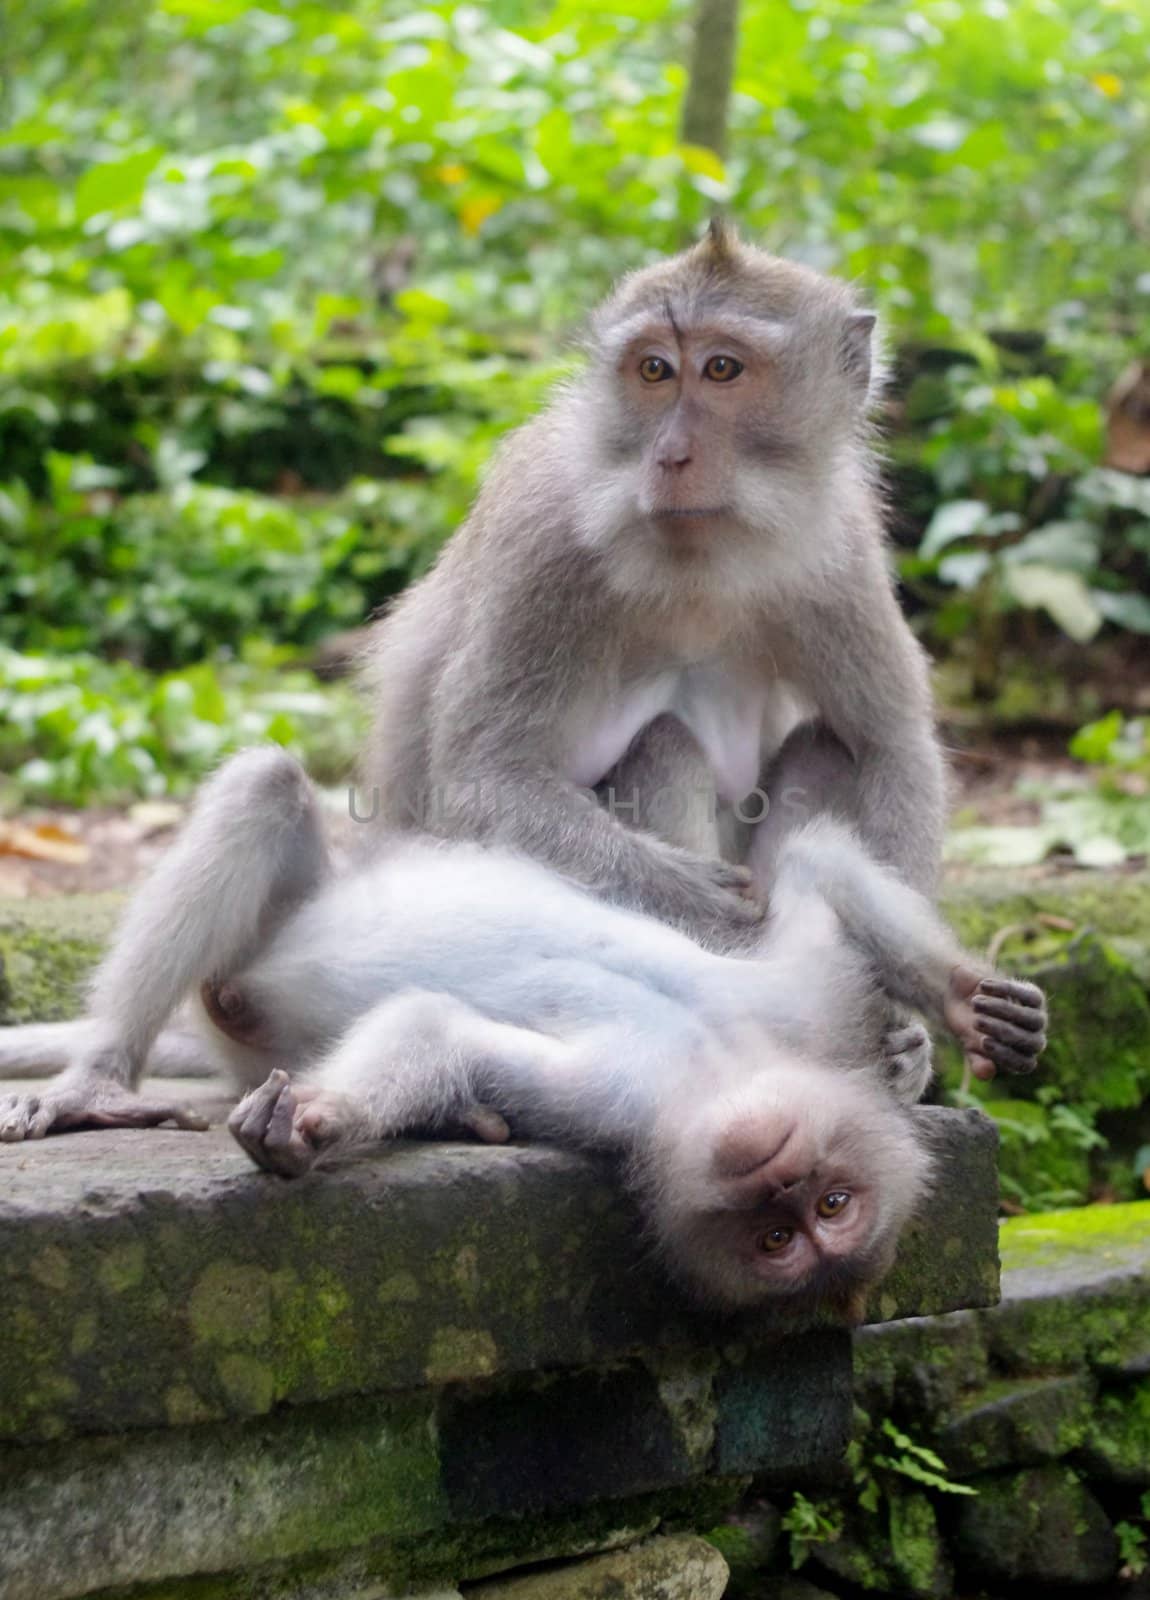 Two monkeys playing together in Monkey Forest, Ubud, Bali, Indonesia.